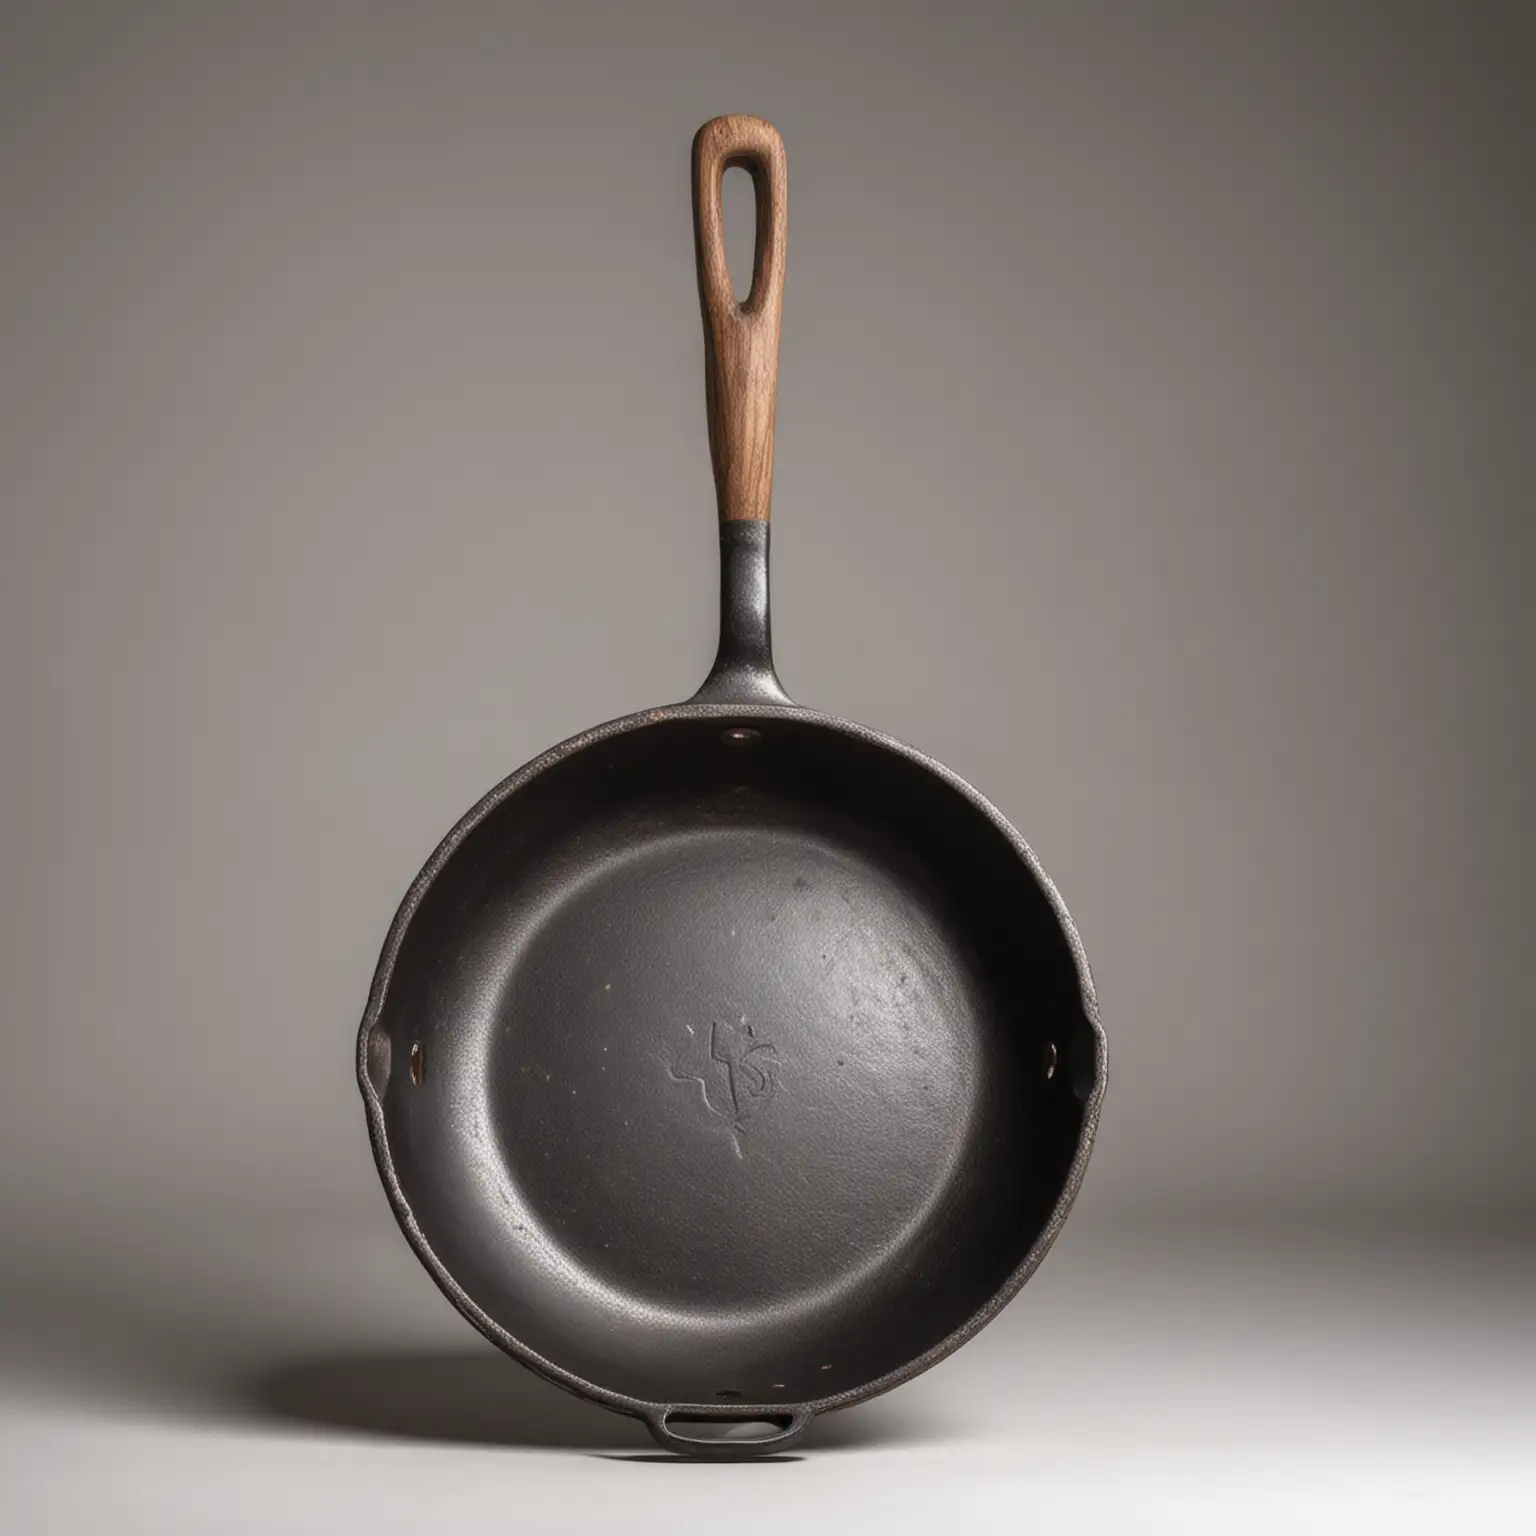 High-Quality-Steel-Ancient-Skillet-with-Long-Handle-on-White-Background